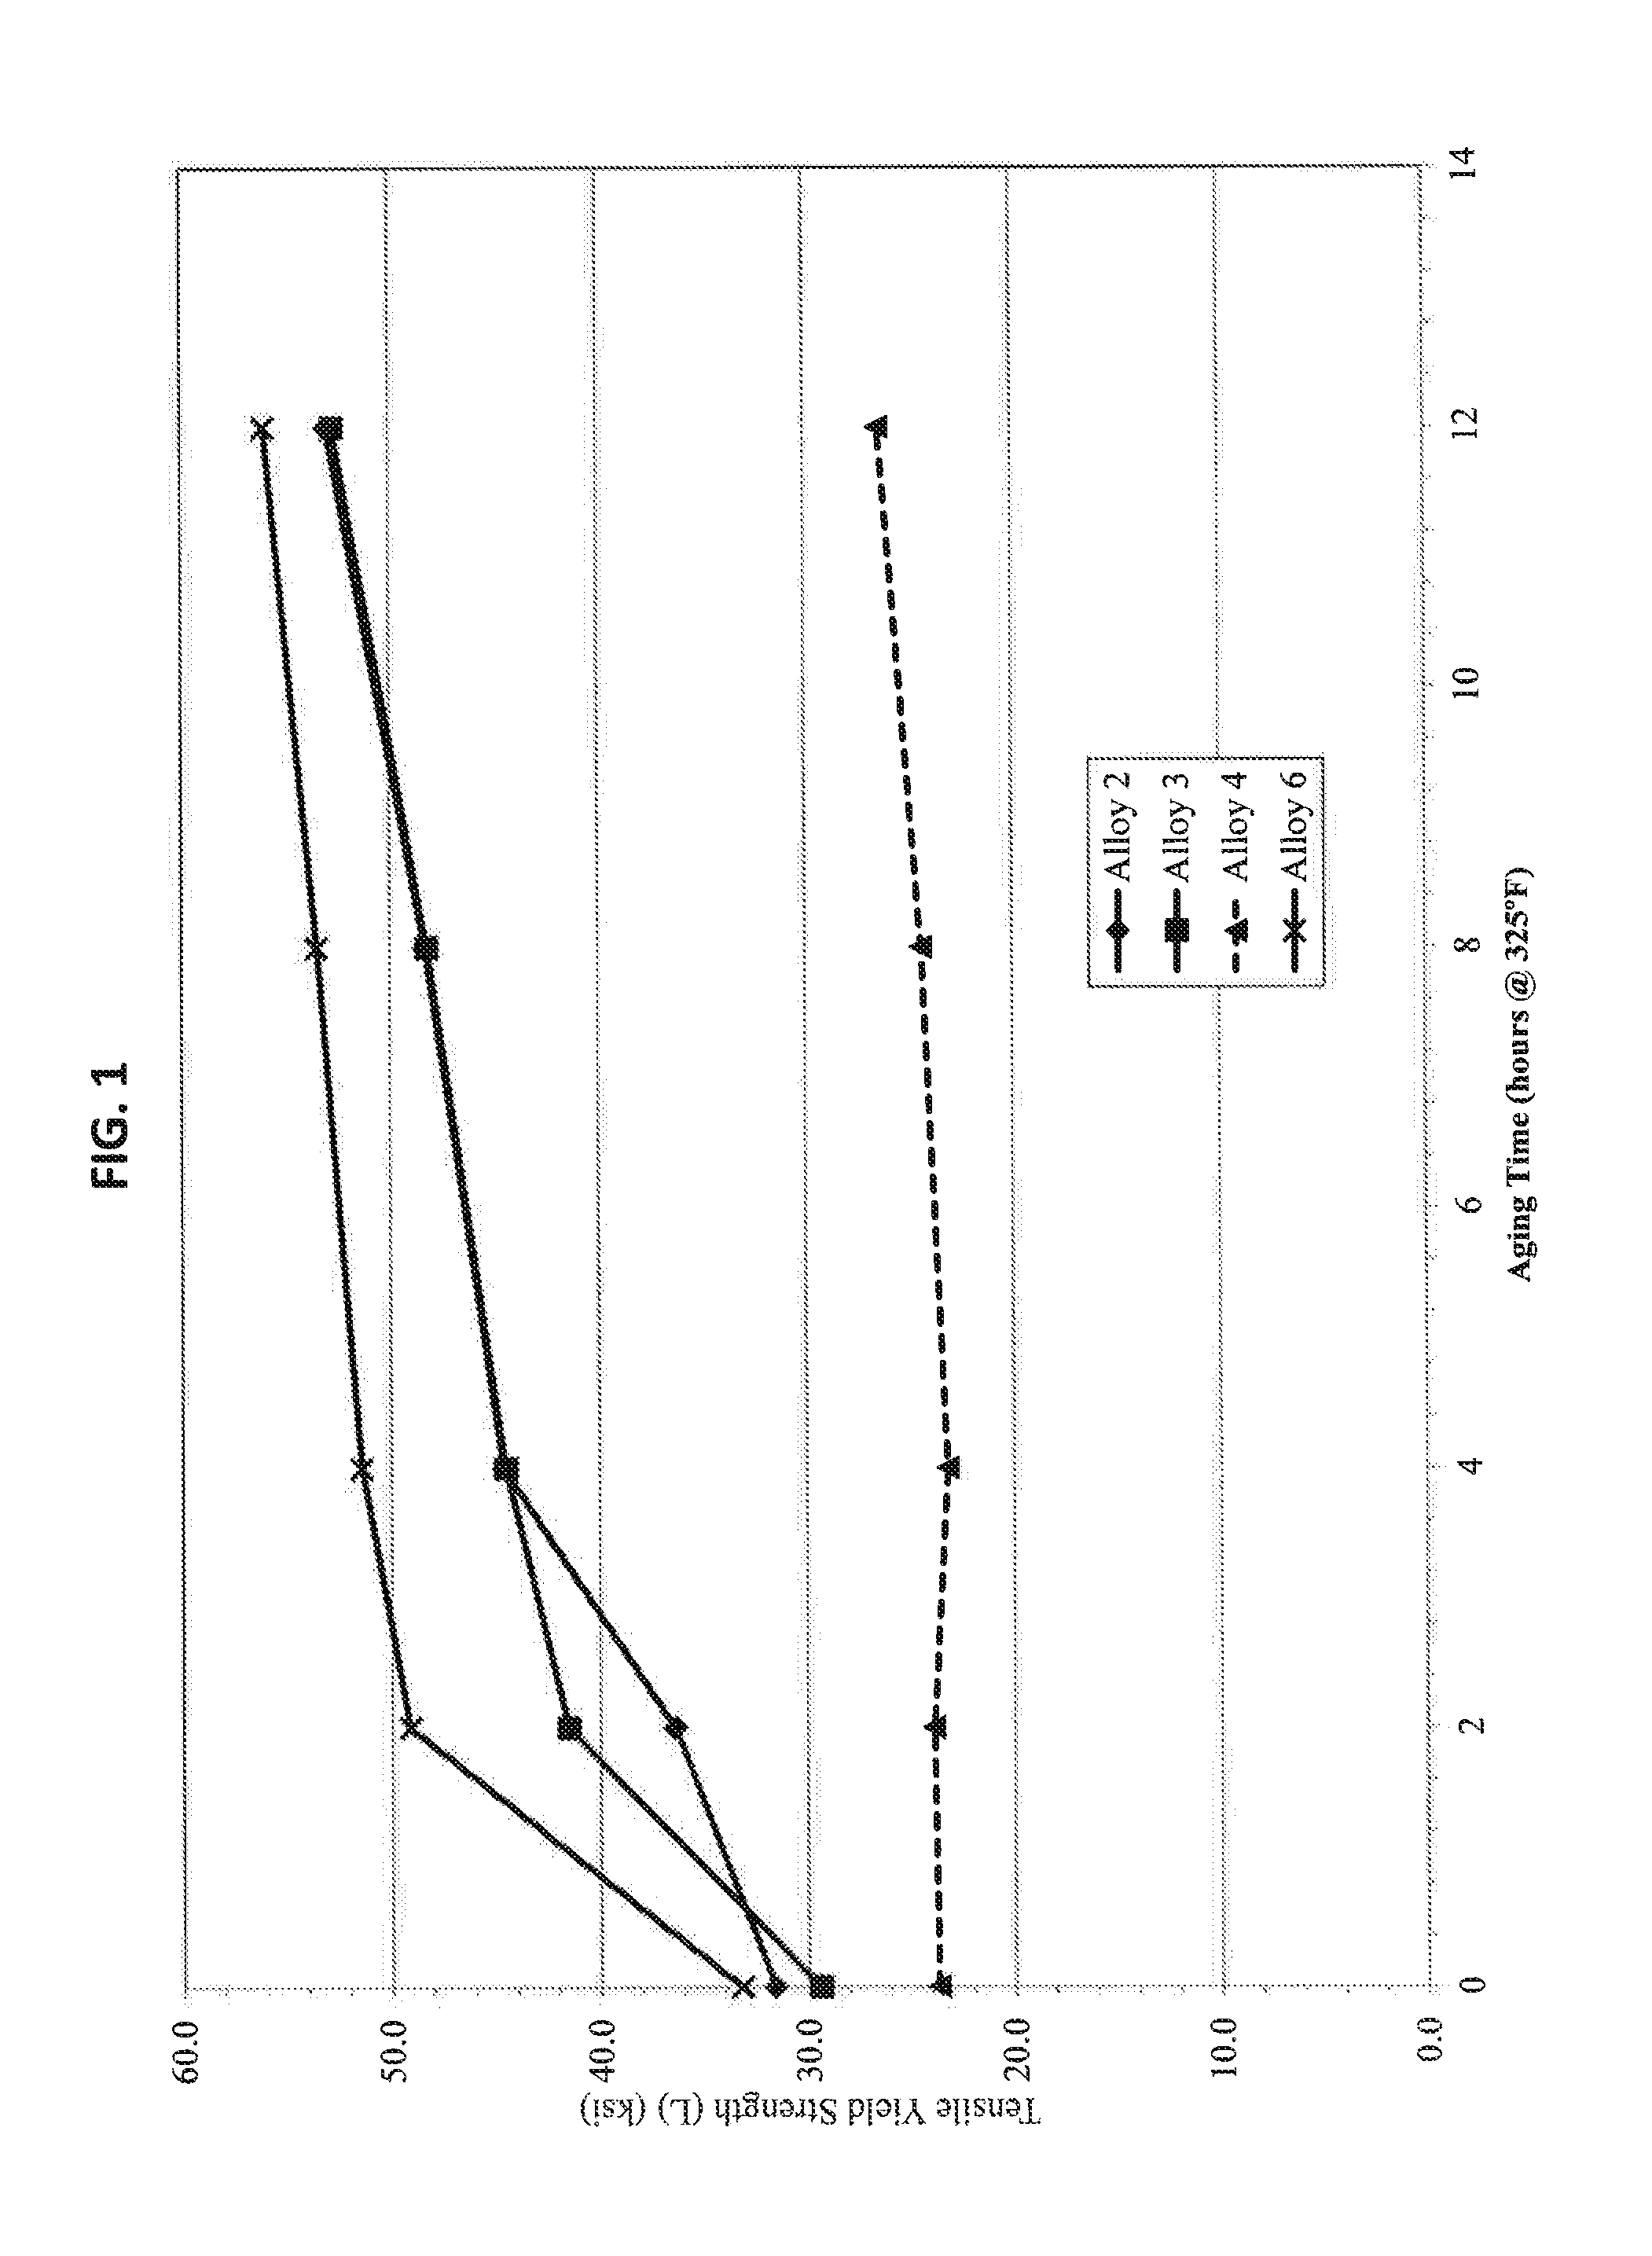 Heat treatable aluminum alloys having magnesium and zinc and methods for producing the same